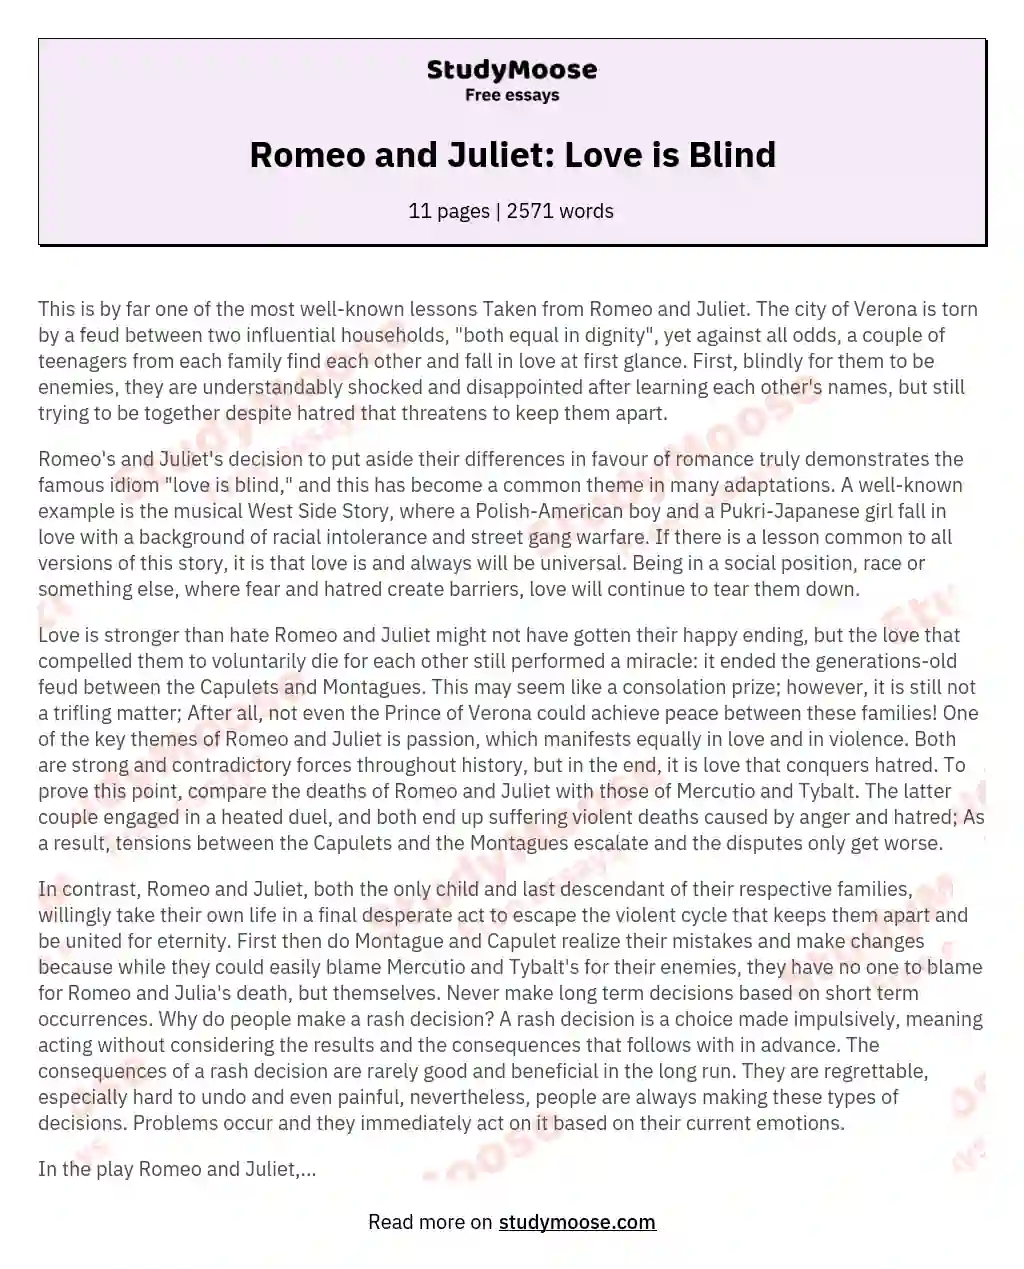 Romeo and Juliet: Love is Blind